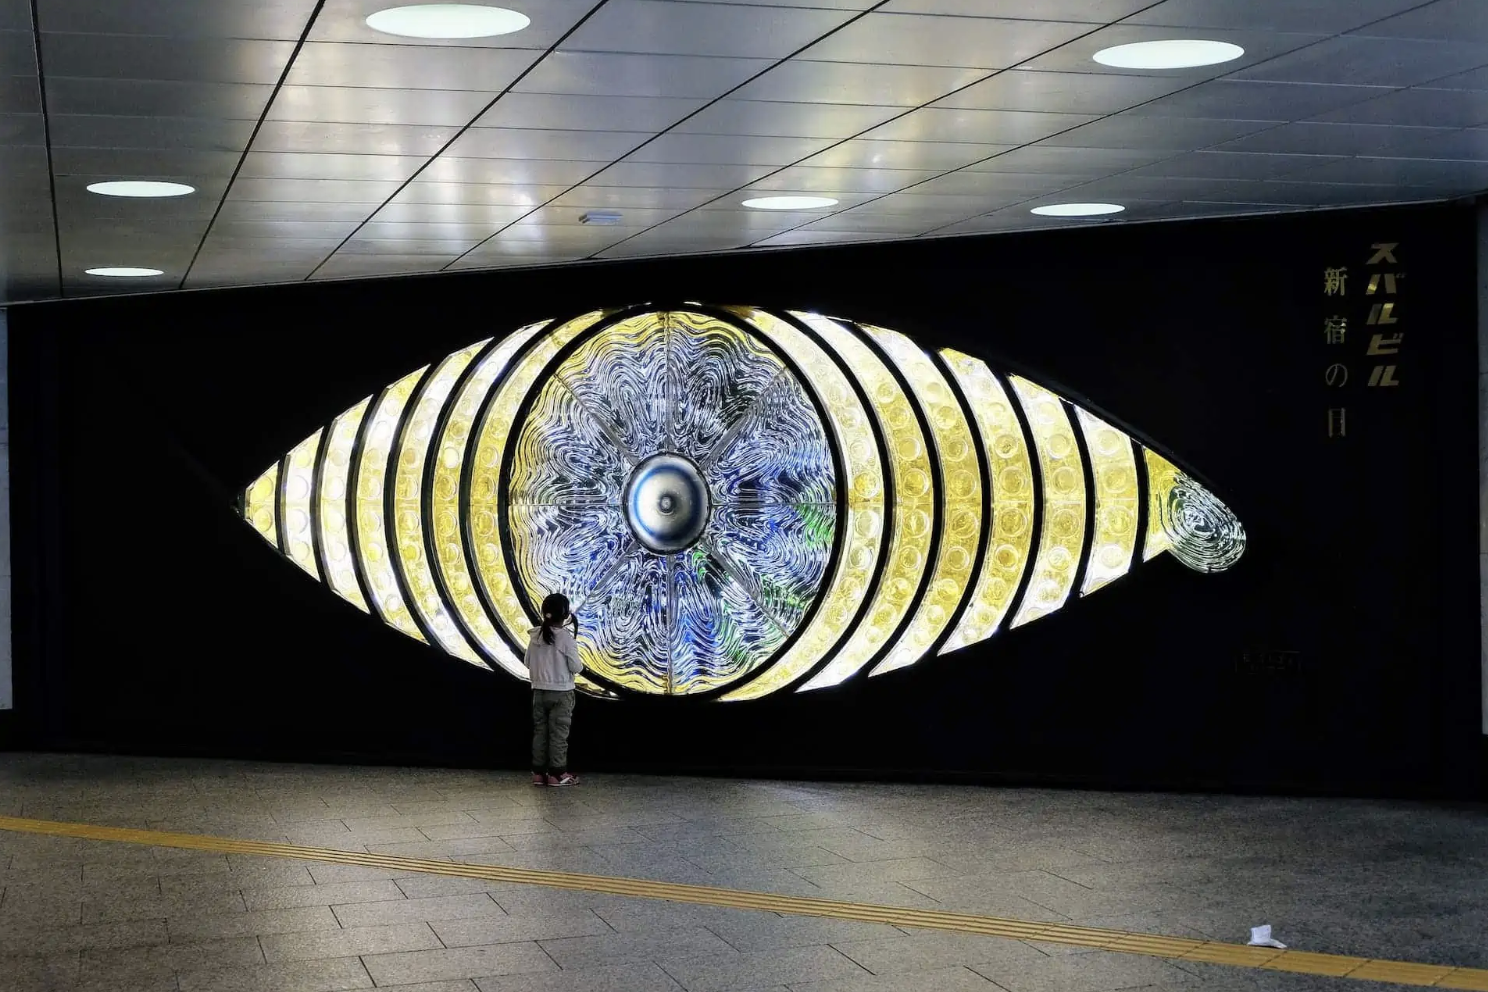 photo of person standing in front of a large eye artpiece